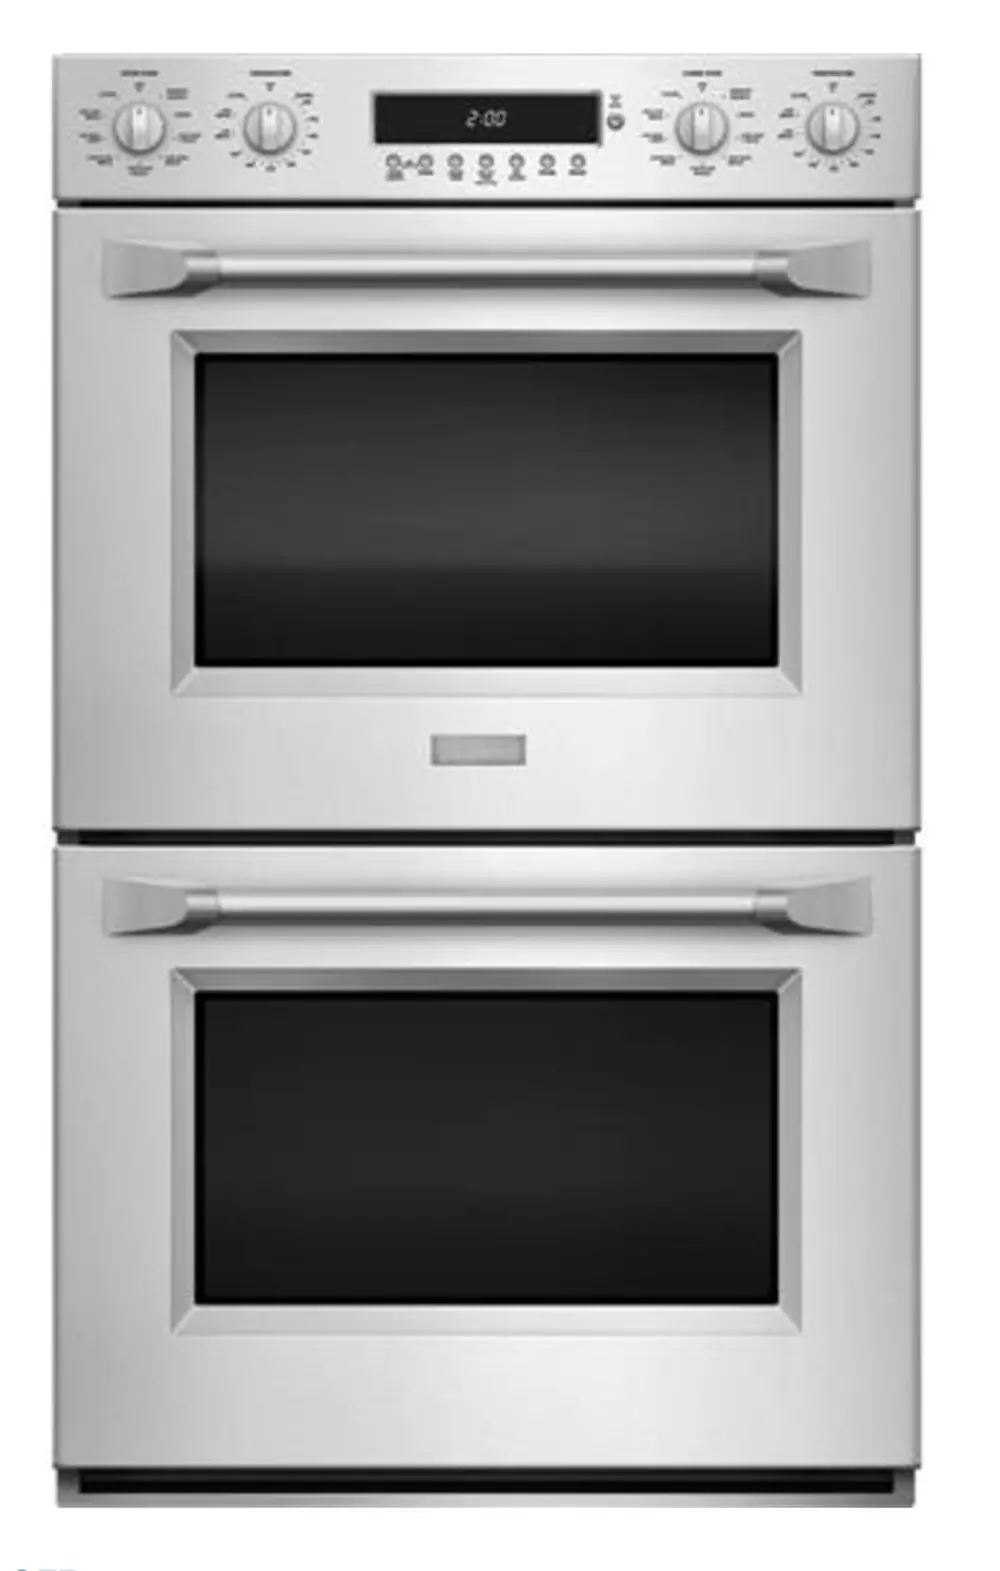 ZET2PHSS Monogram 30 Inch Professional Double Convection Oven - 10.0 cu. ft. Stainless Steel-1